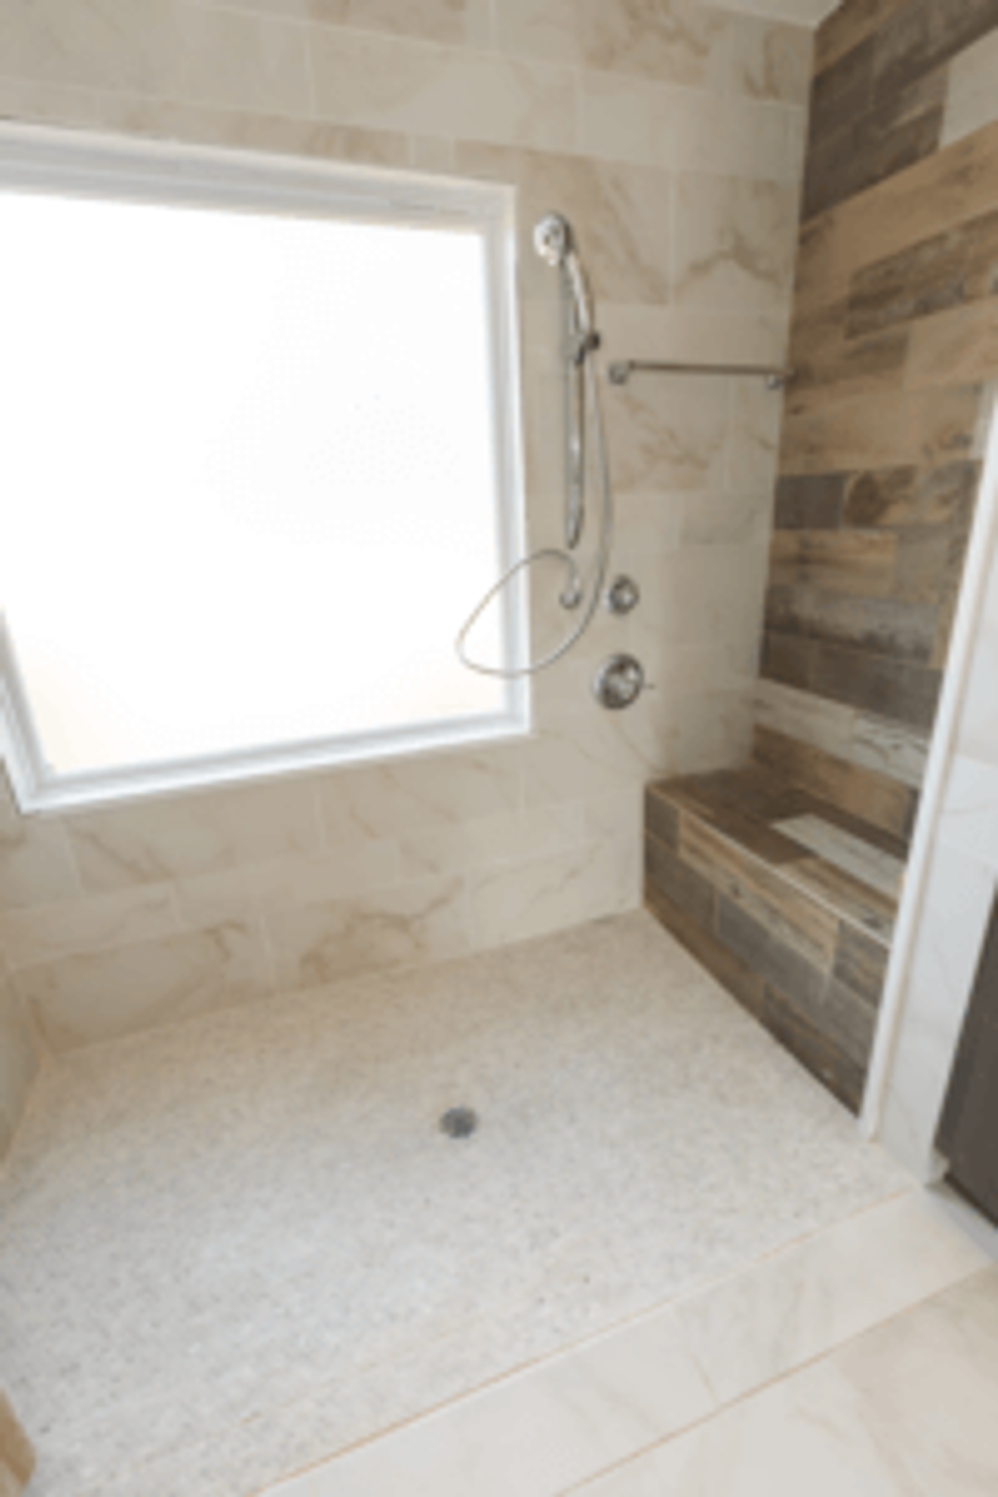 The curbless shower is easy to step or roll into and features a bench for sitting.